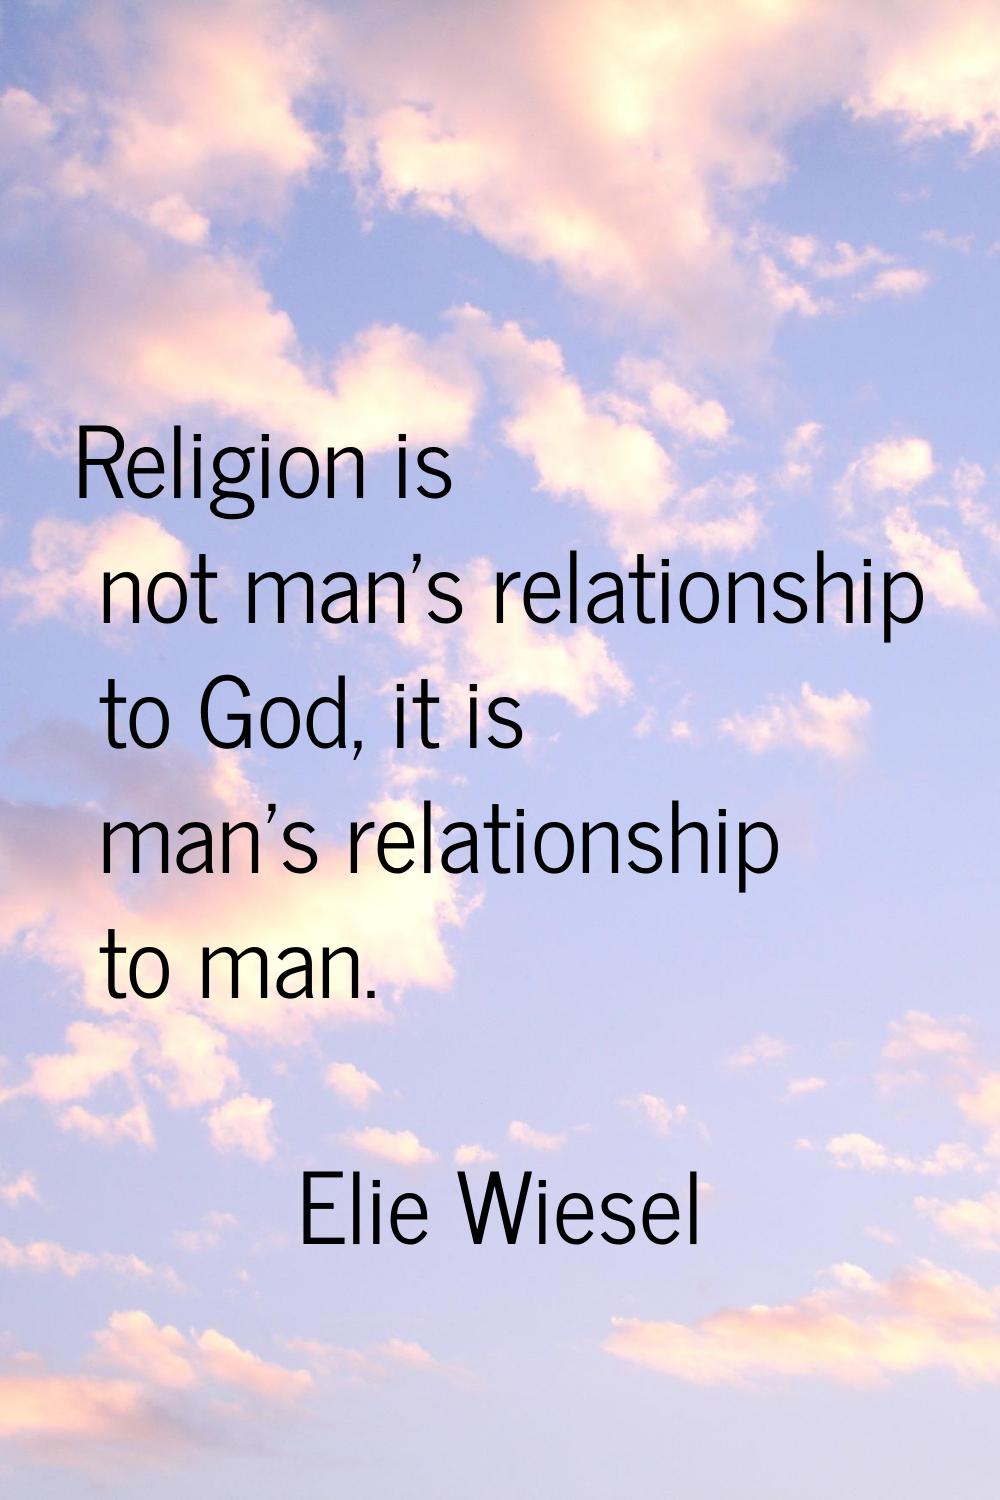 Religion is not man's relationship to God, it is man's relationship to man.